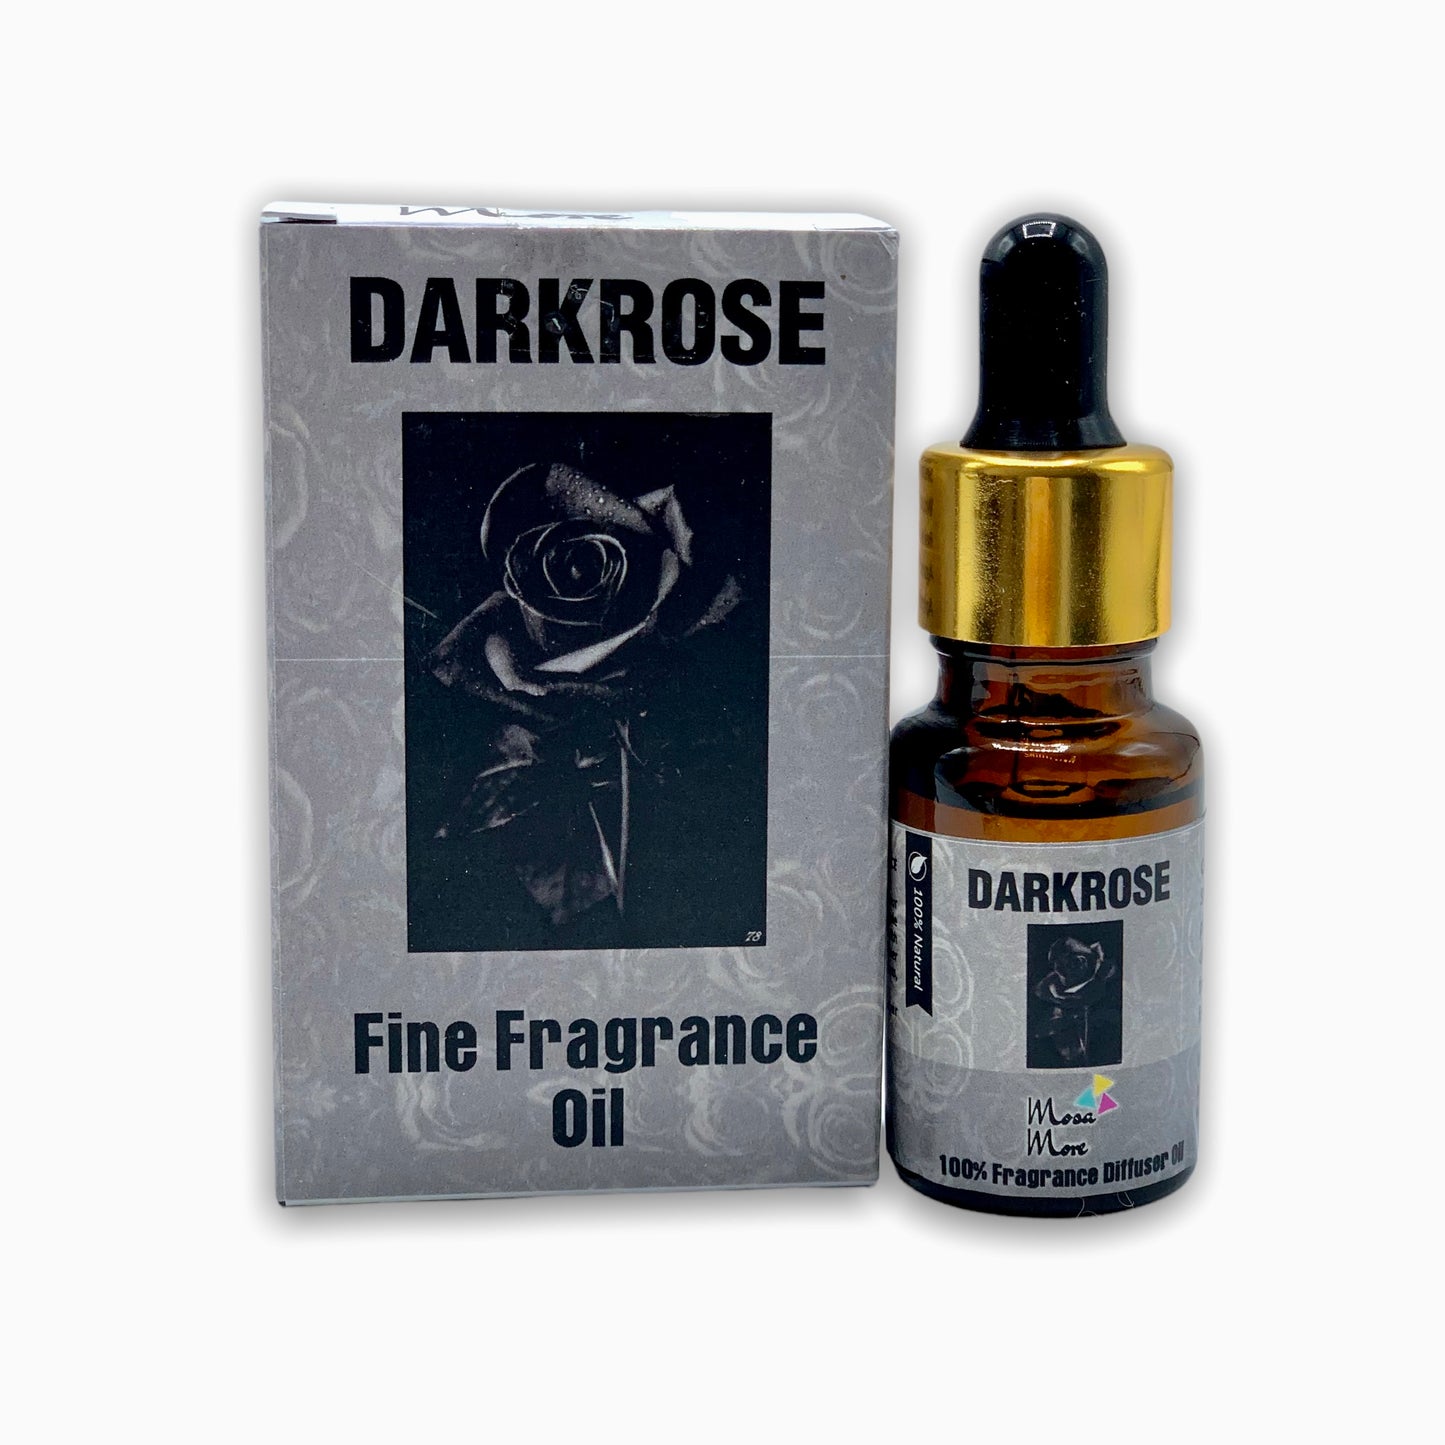 Mosa More Dark Rose Fine Fragrance Oil for Diffuser Mysterious, Aphrodisiac and Mesmerizing long- lasting 10 ml